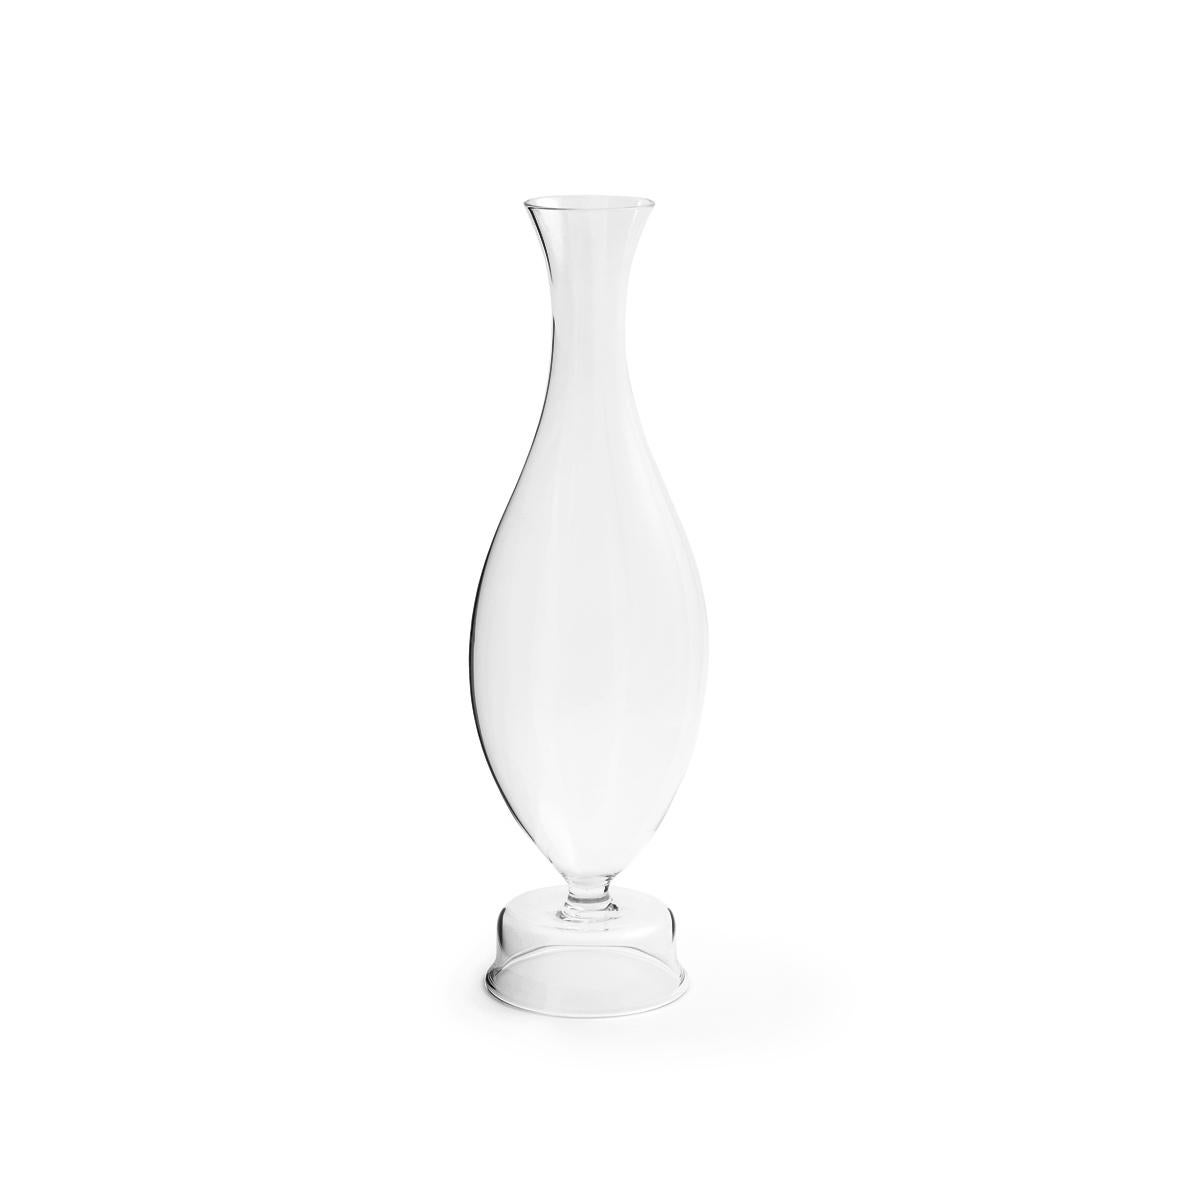 Modern Pims Mouth Blown Glass Bottle / Vase Designed by Aldo Cibic For Sale